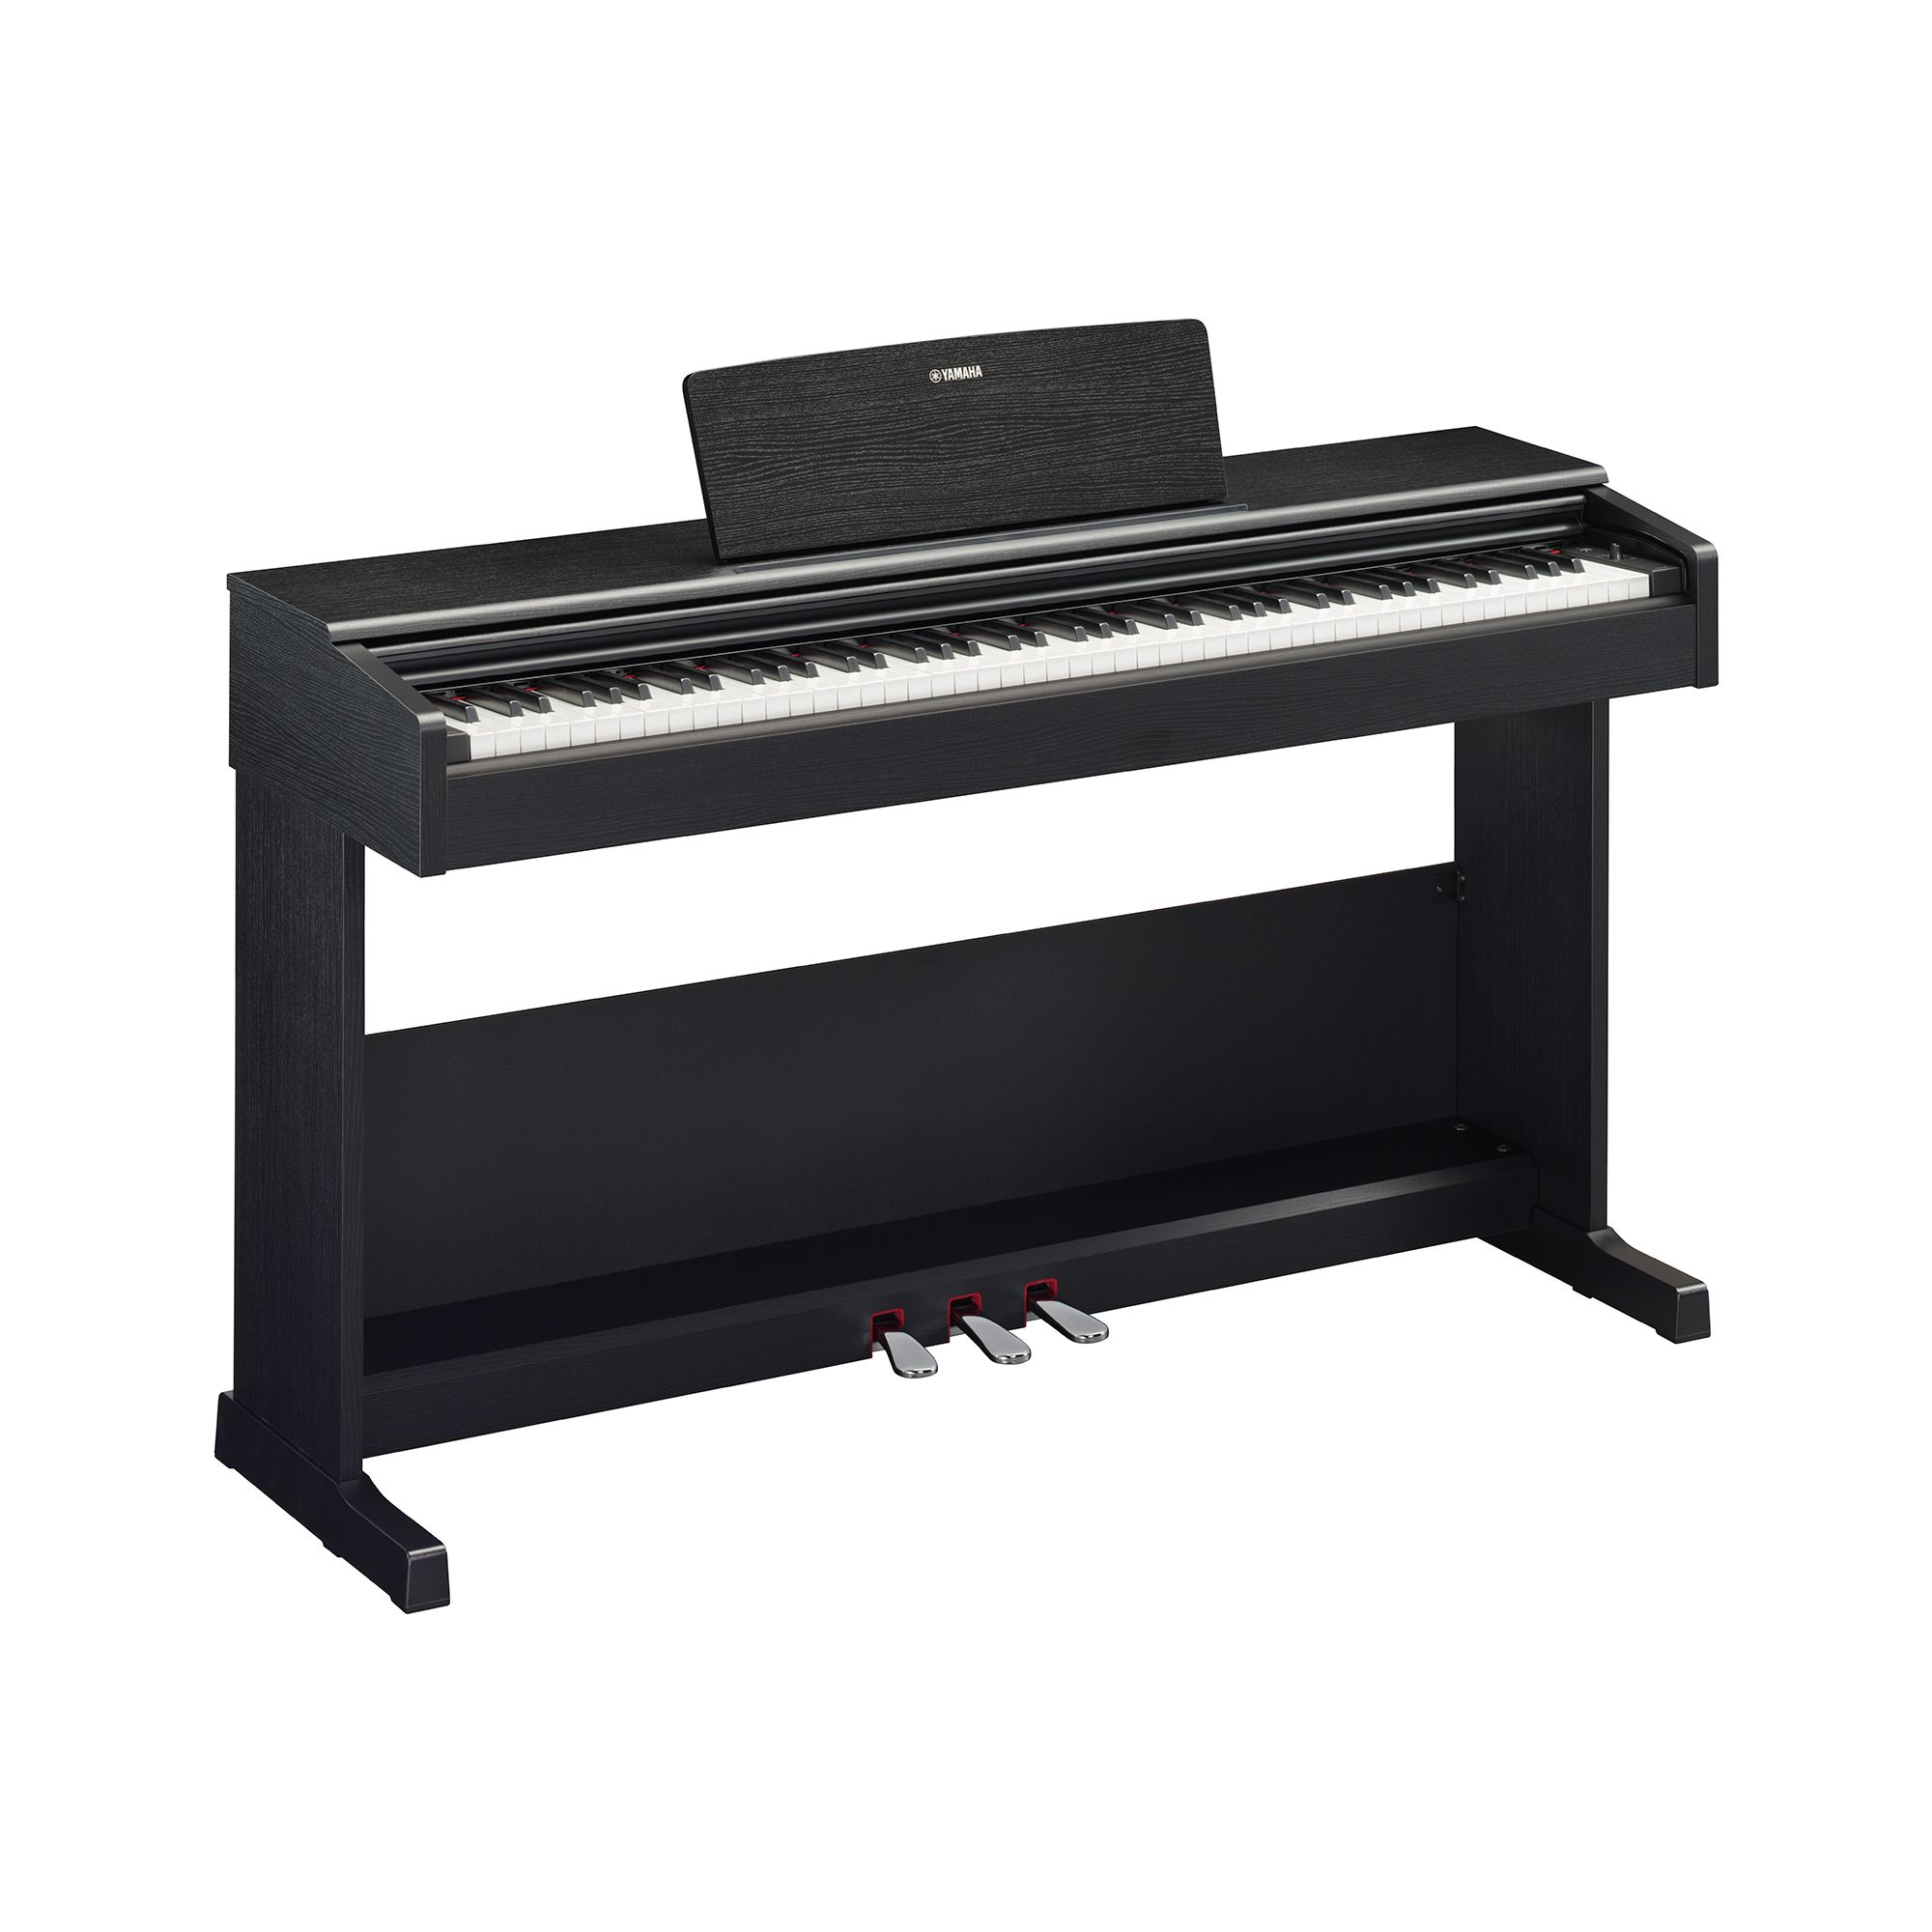 YDP-105 - Overview - ARIUS - Pianos - Musical Instruments 